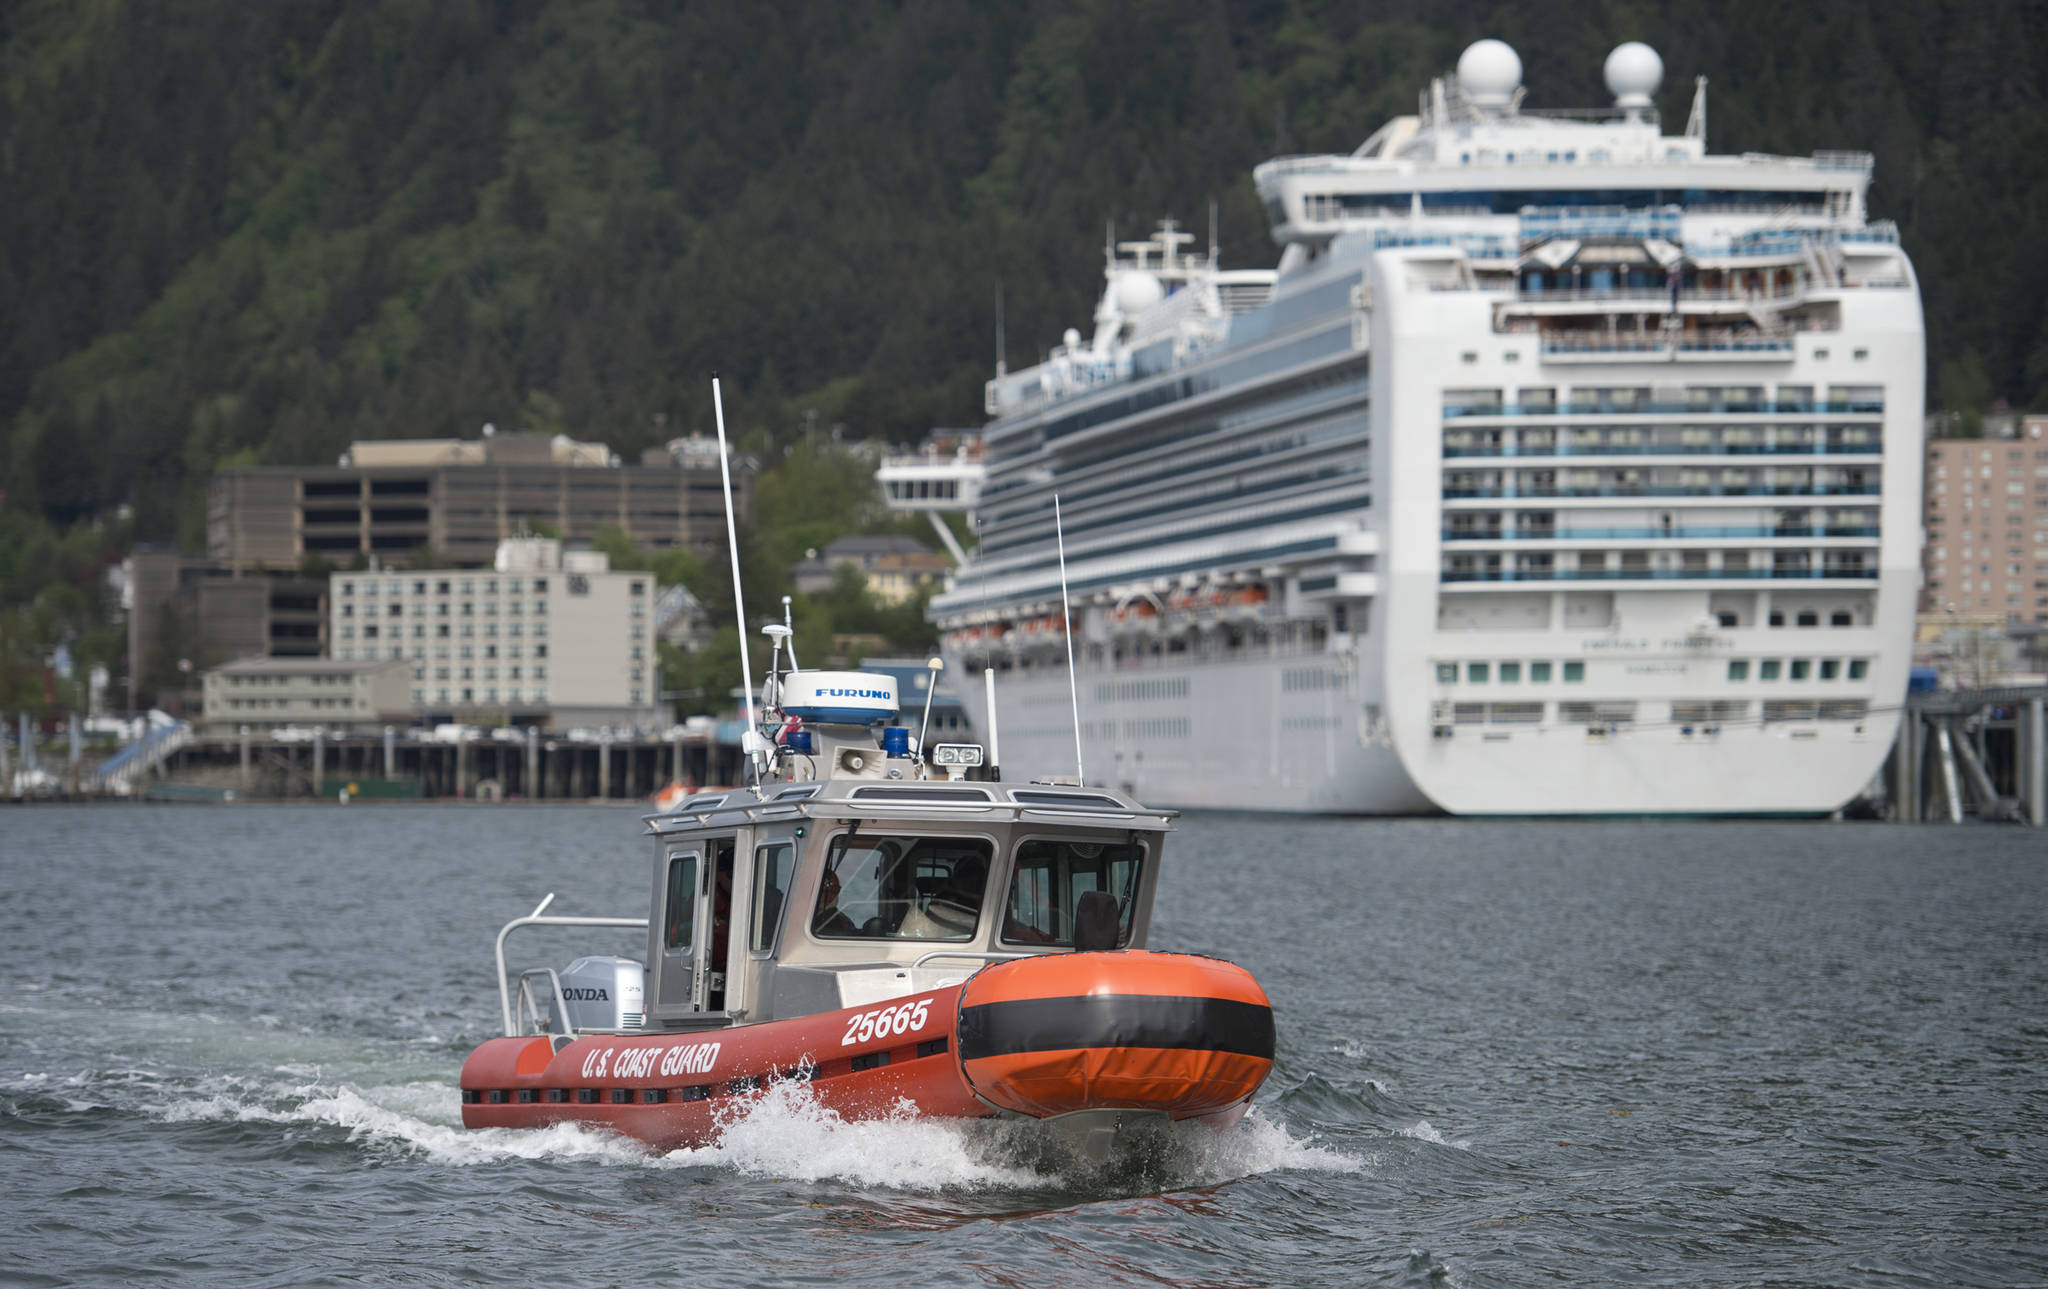 PHOTOS BY Michael Penn | Juneau Empire U.S. Coast Guard personnel aboard a 25-foot Response Boat conduct a Maritime Security Response operation in the Juneau harbor on Wednesday.